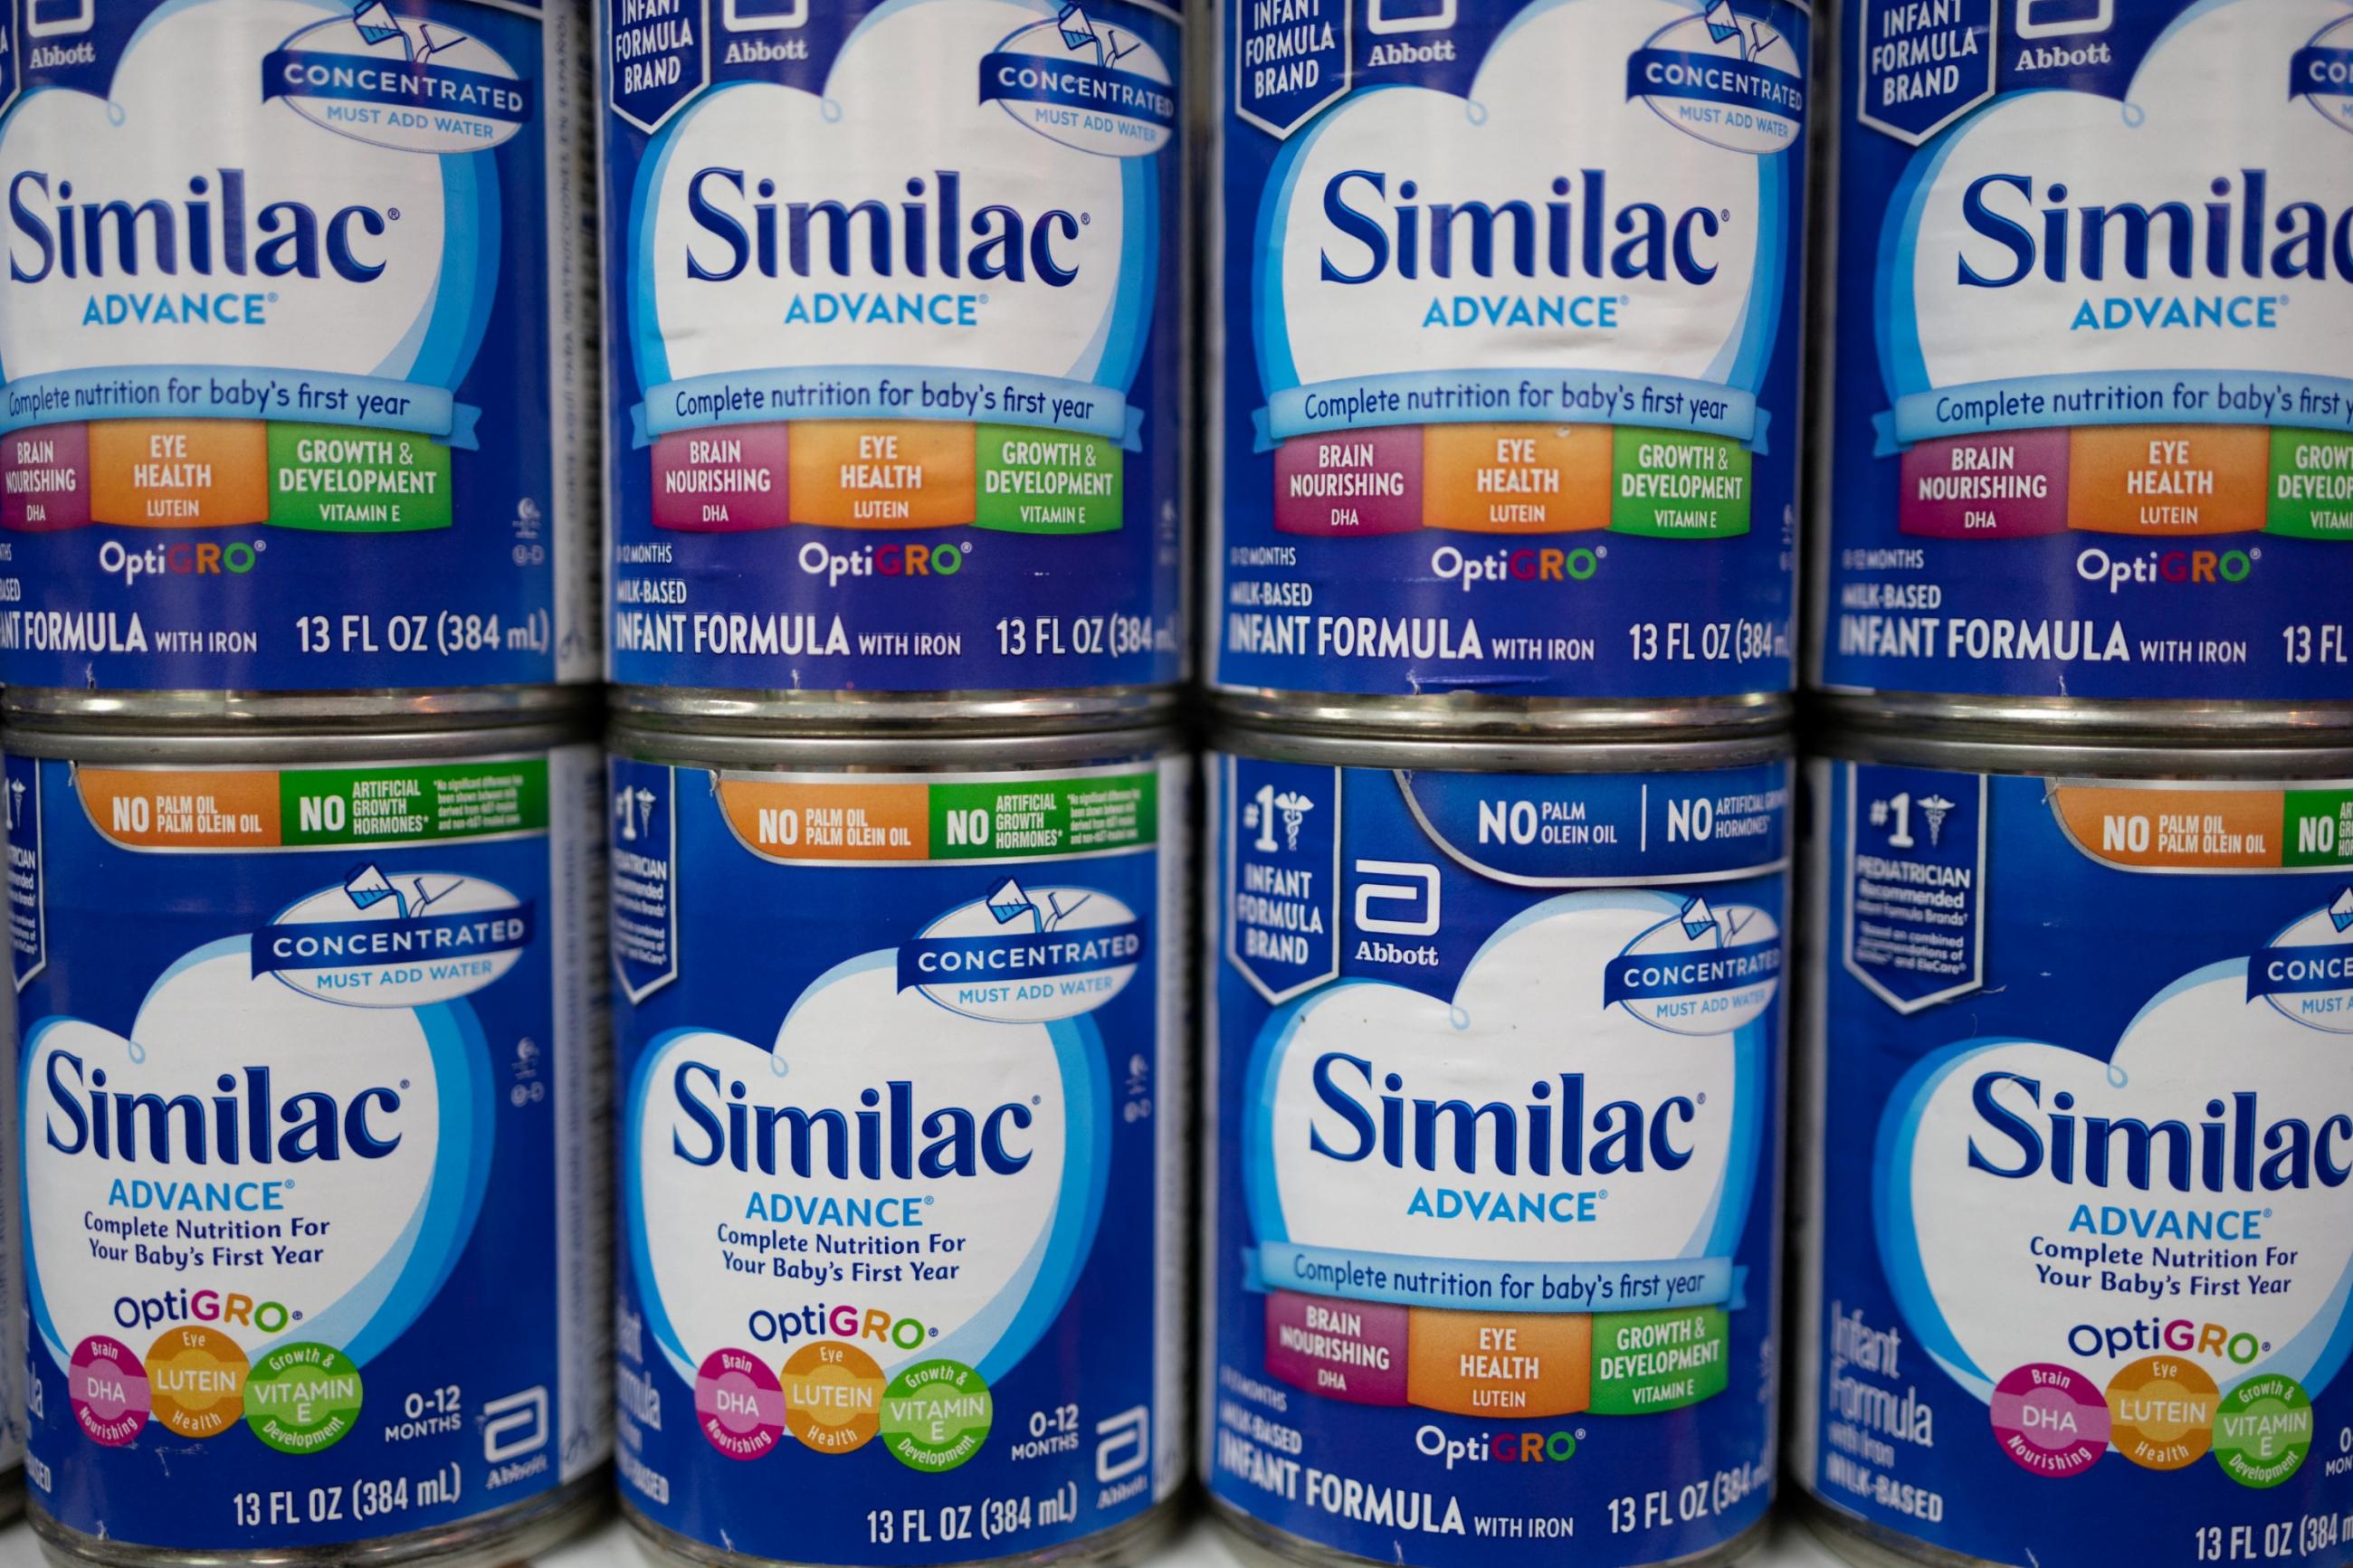 Eight blue cans of baby formula with white, orange, and green labels that read "Similac" stand in stacks of two on a pharmacy shelf.